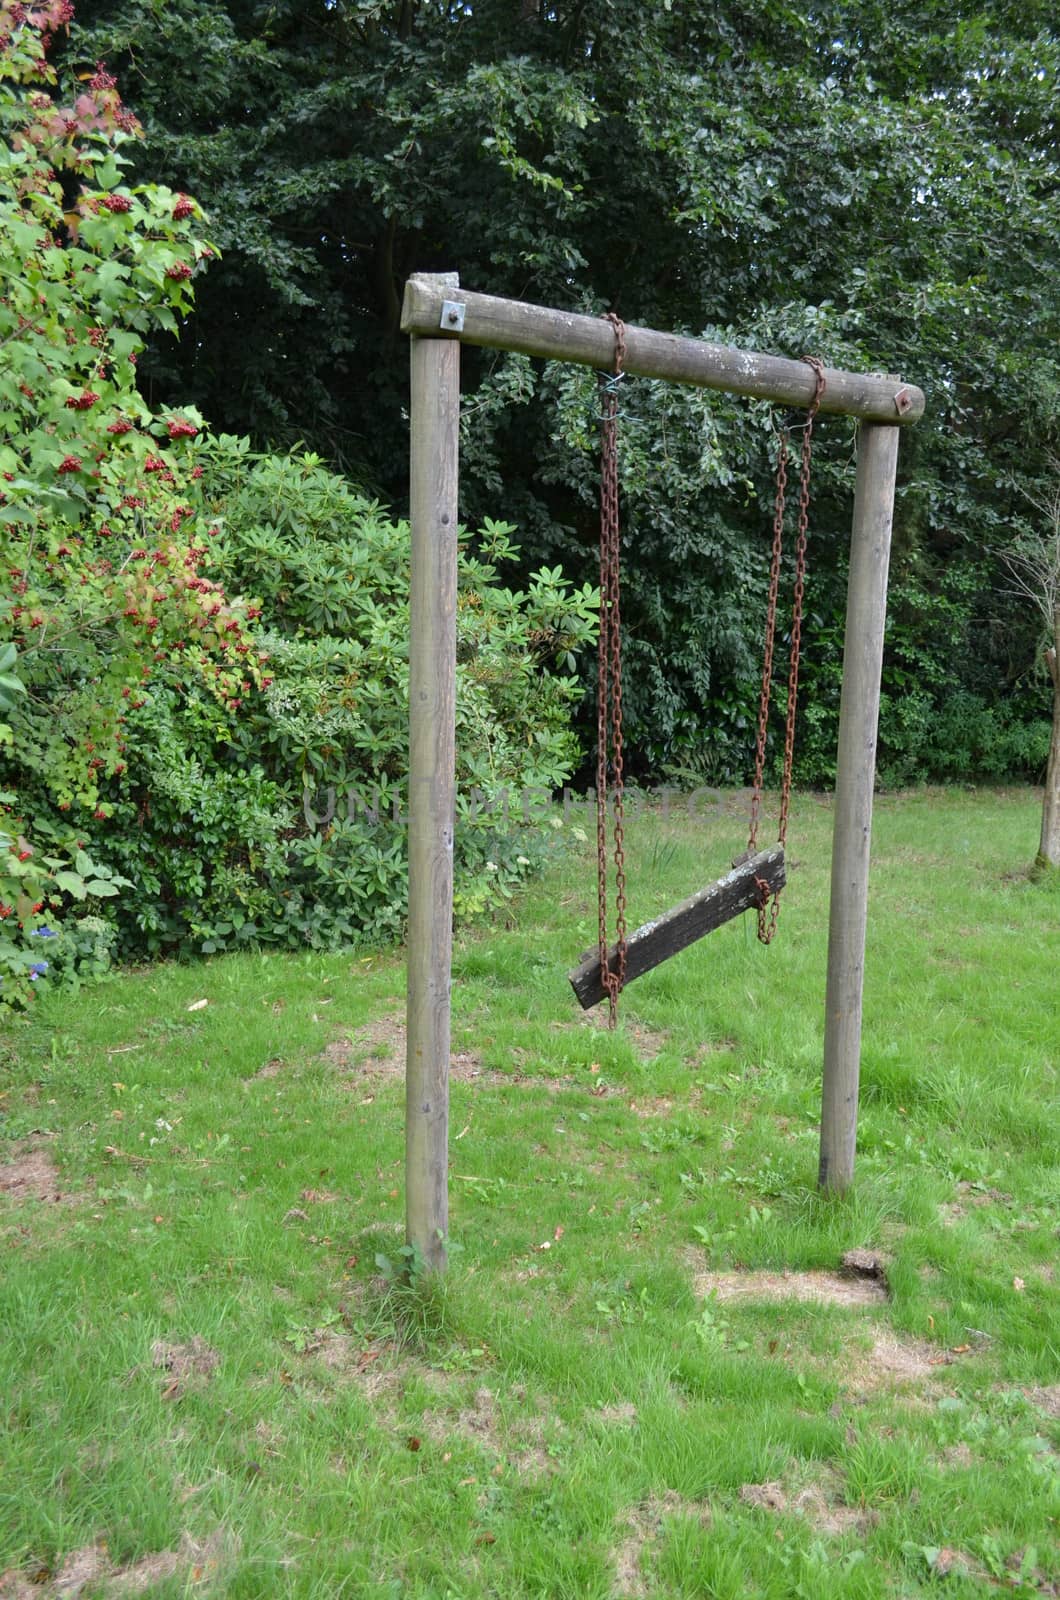 Old wooden play swing in garden setting.